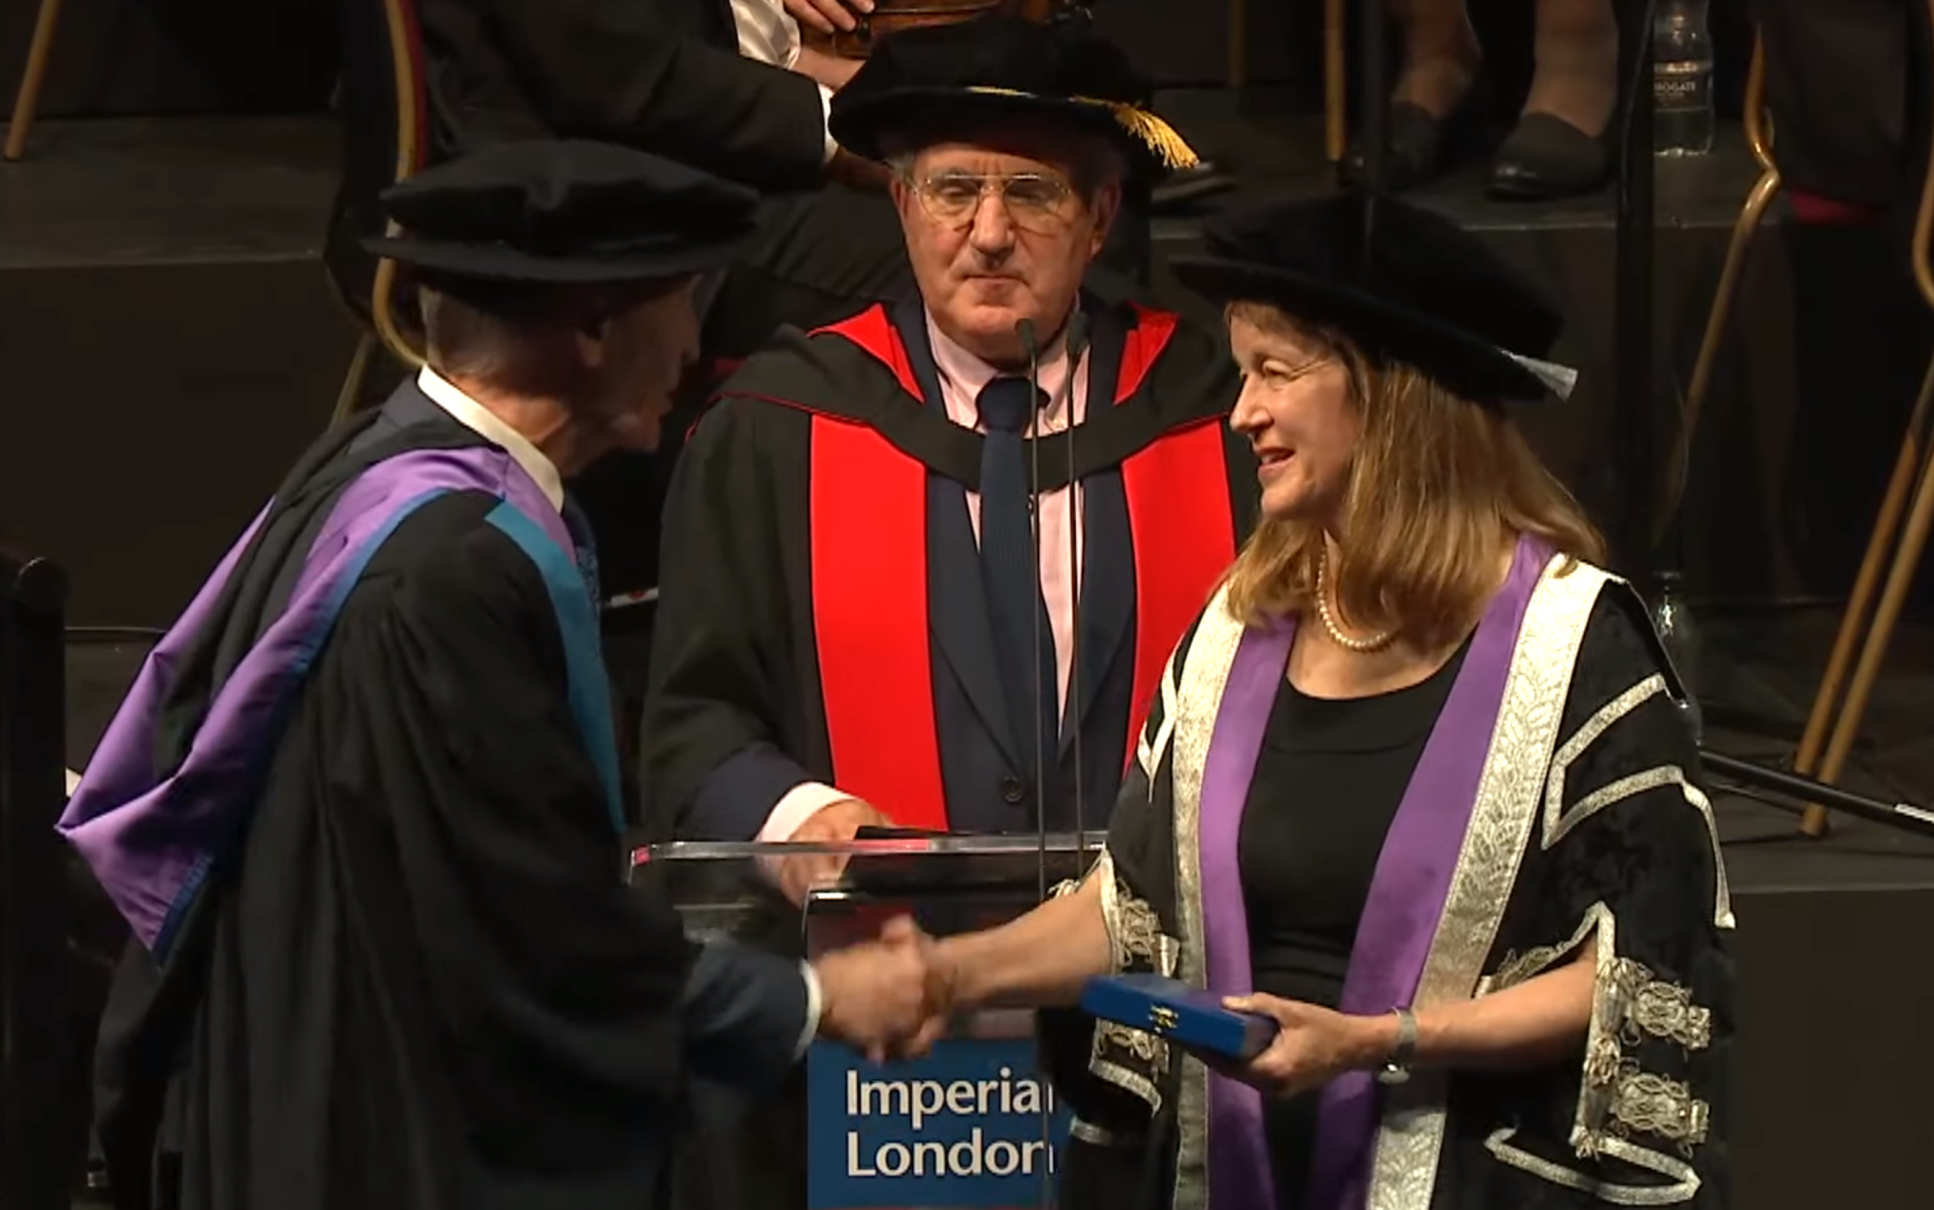 Prof Best received the Imperial College Medal from President Gast